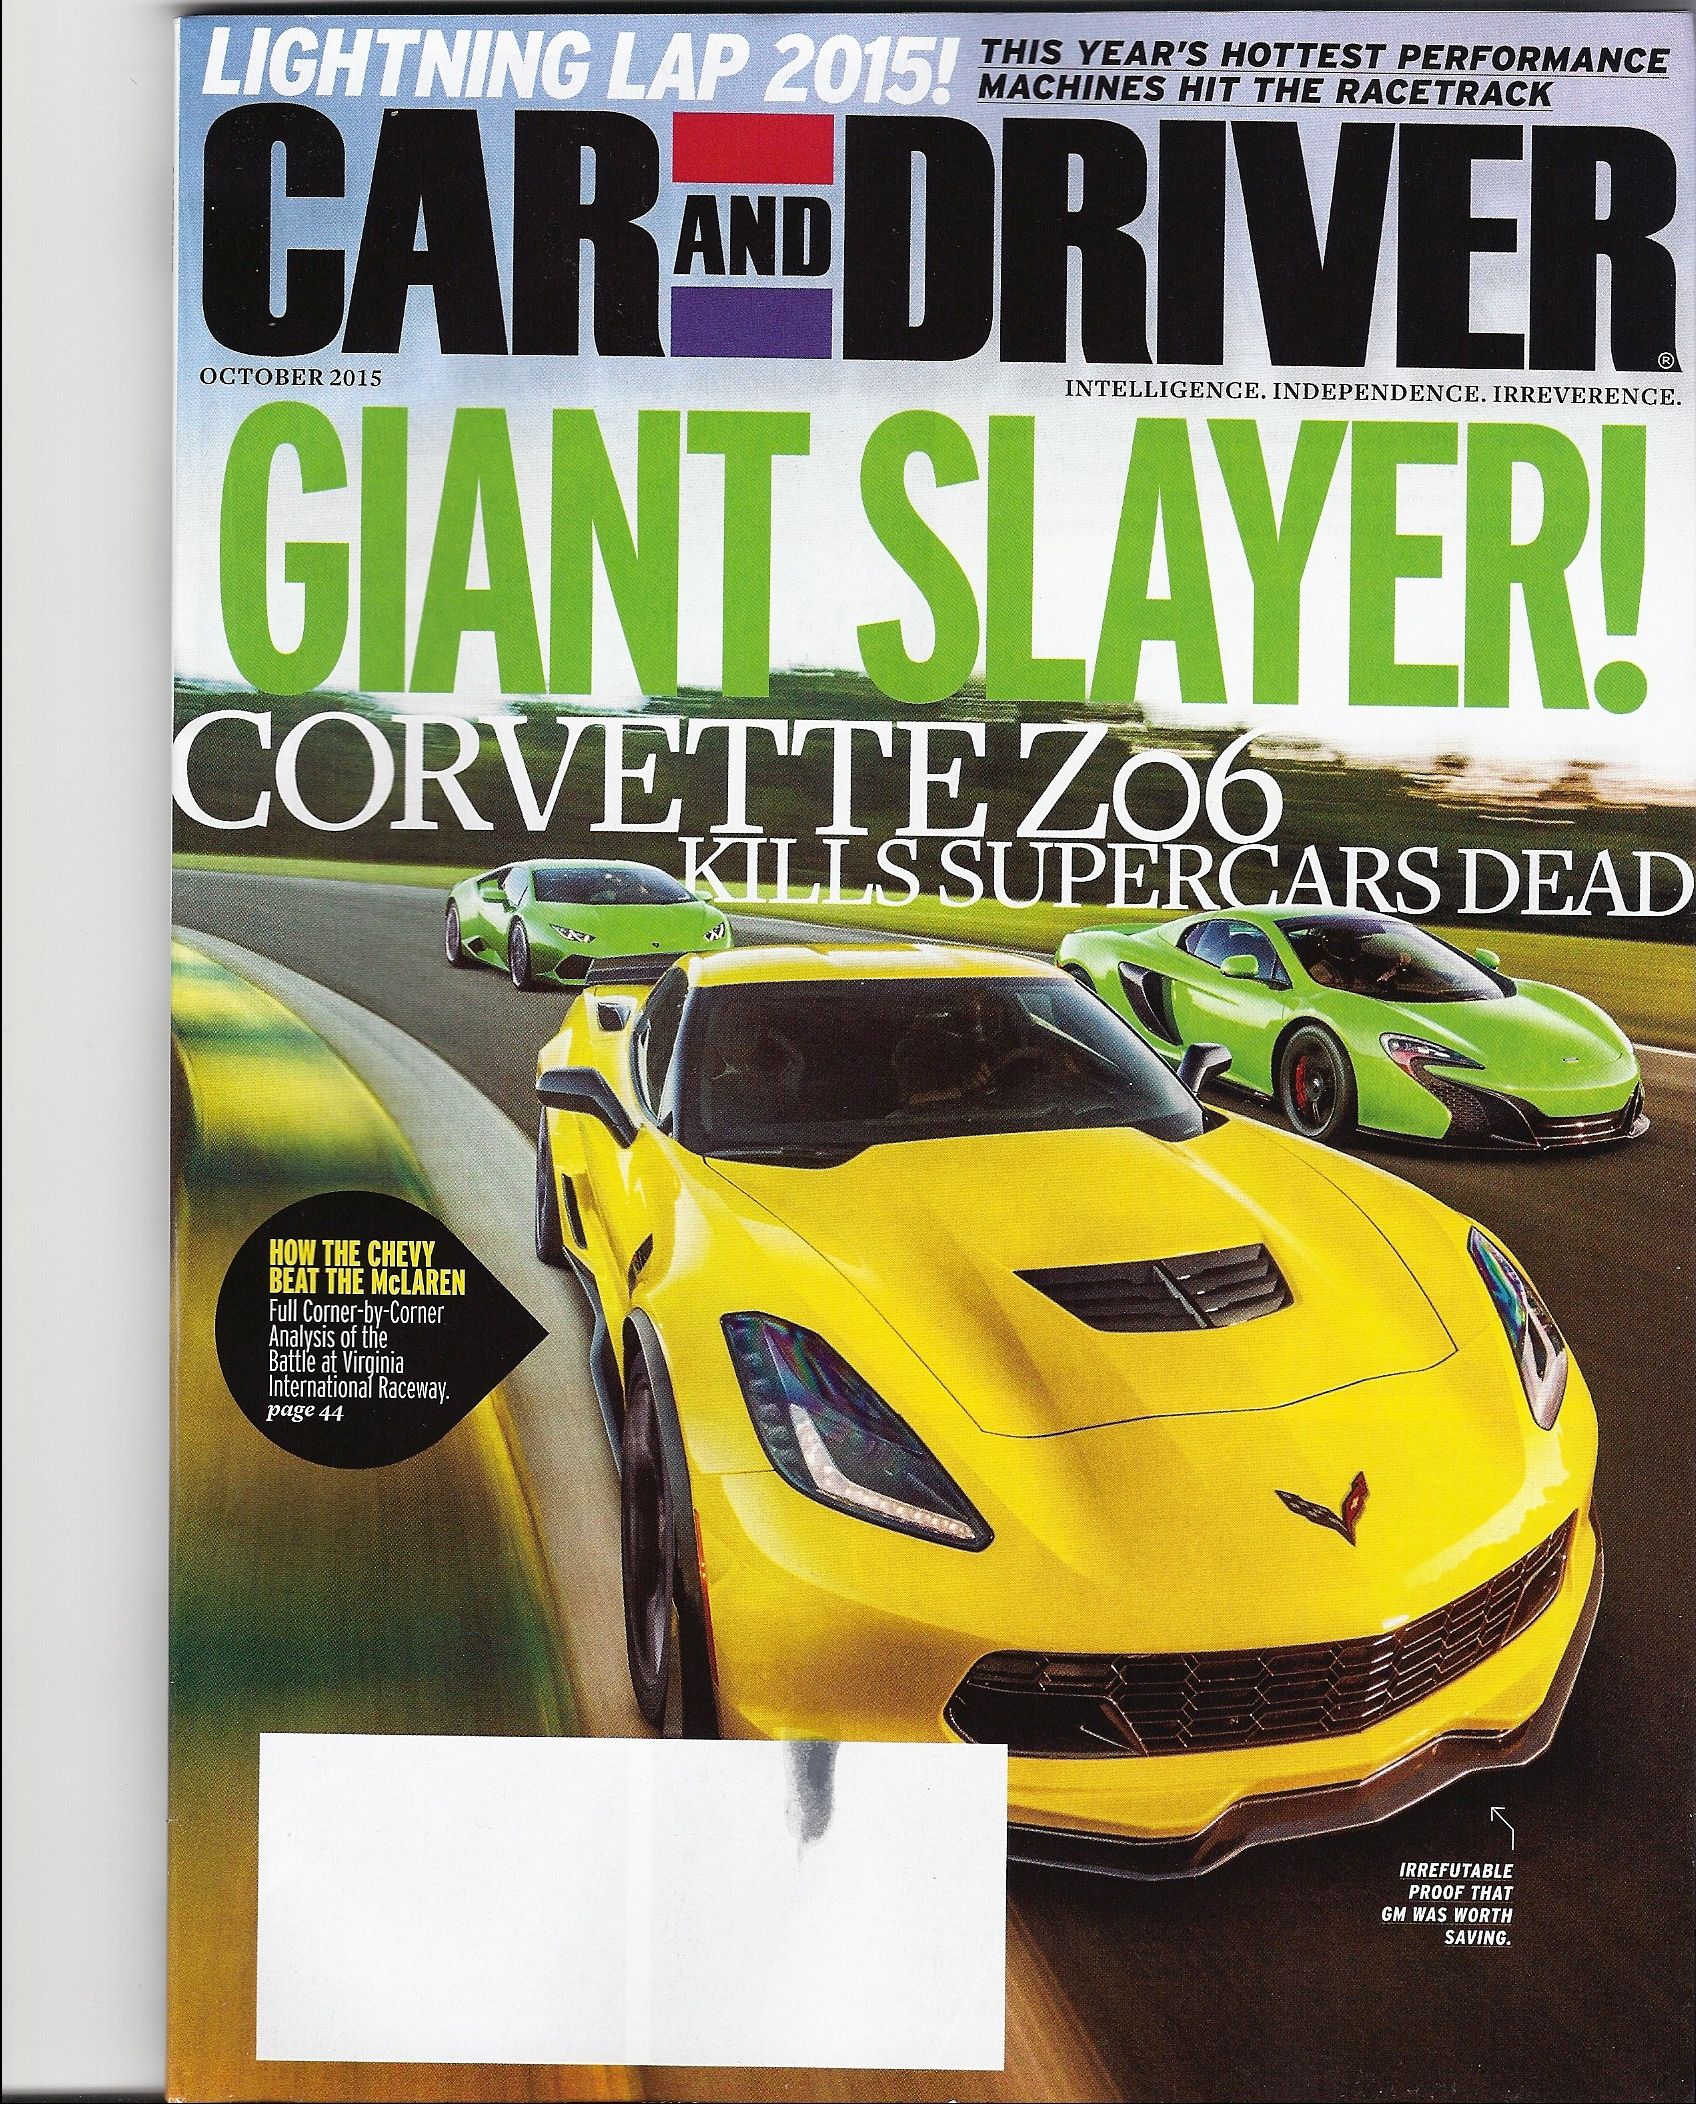 47914766d1441830248-just-wow-car-and-driver-october-mag-cover-scan0001.jpg